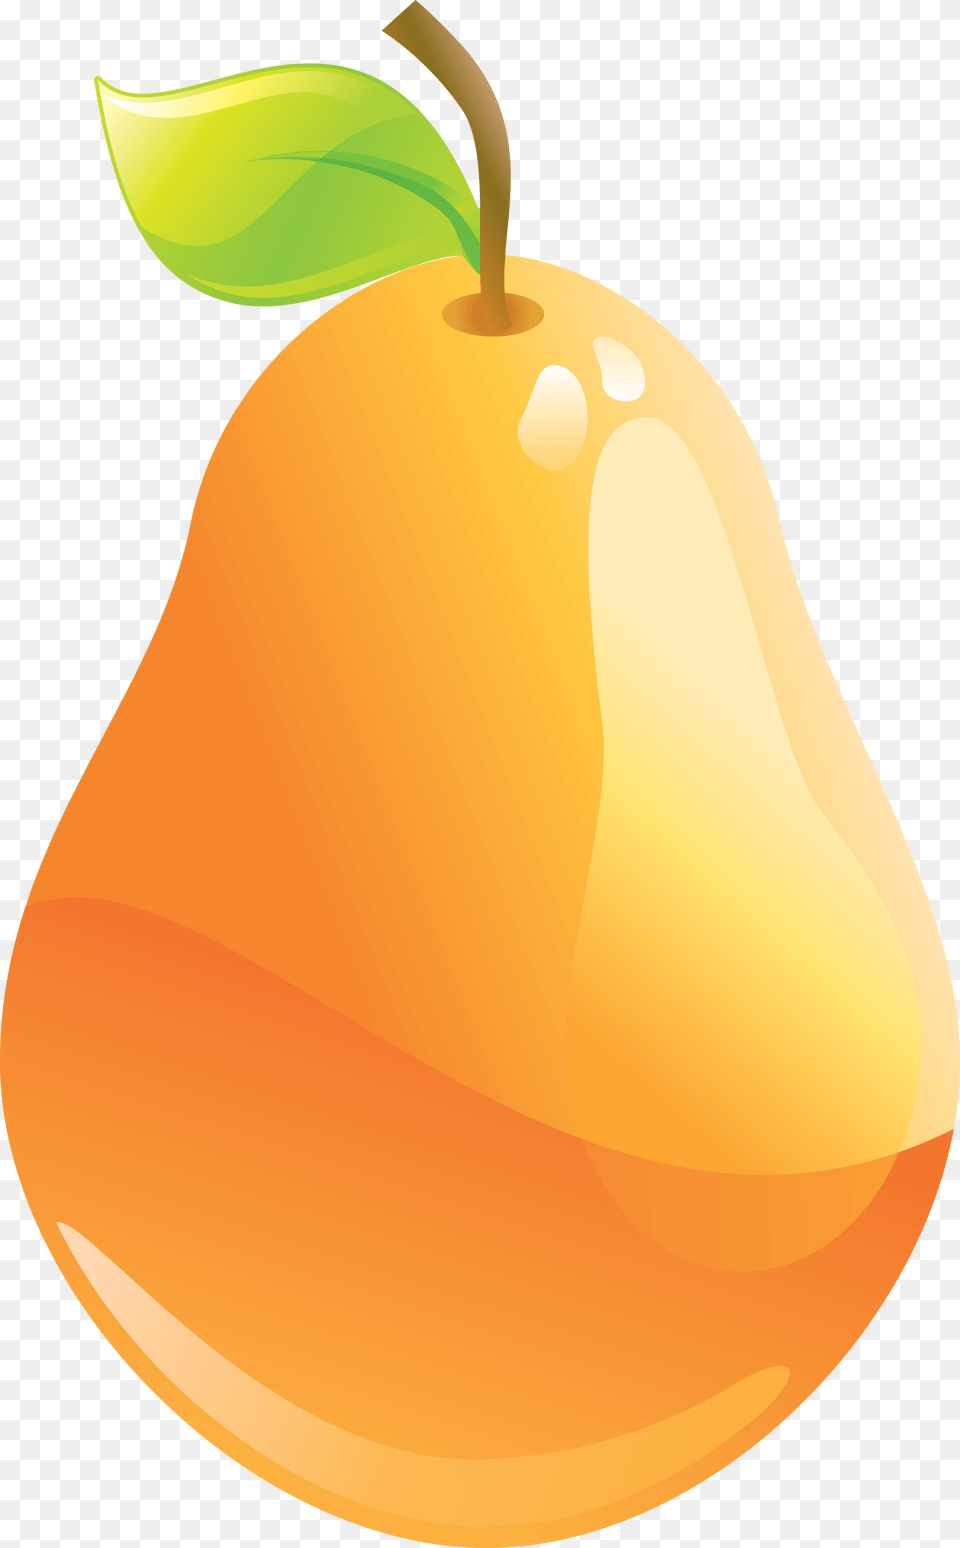 Orange Cantaloupe Hd Best Melon Icon Photo Cartoon Fruit And Vegetables, Food, Plant, Produce, Apricot Png